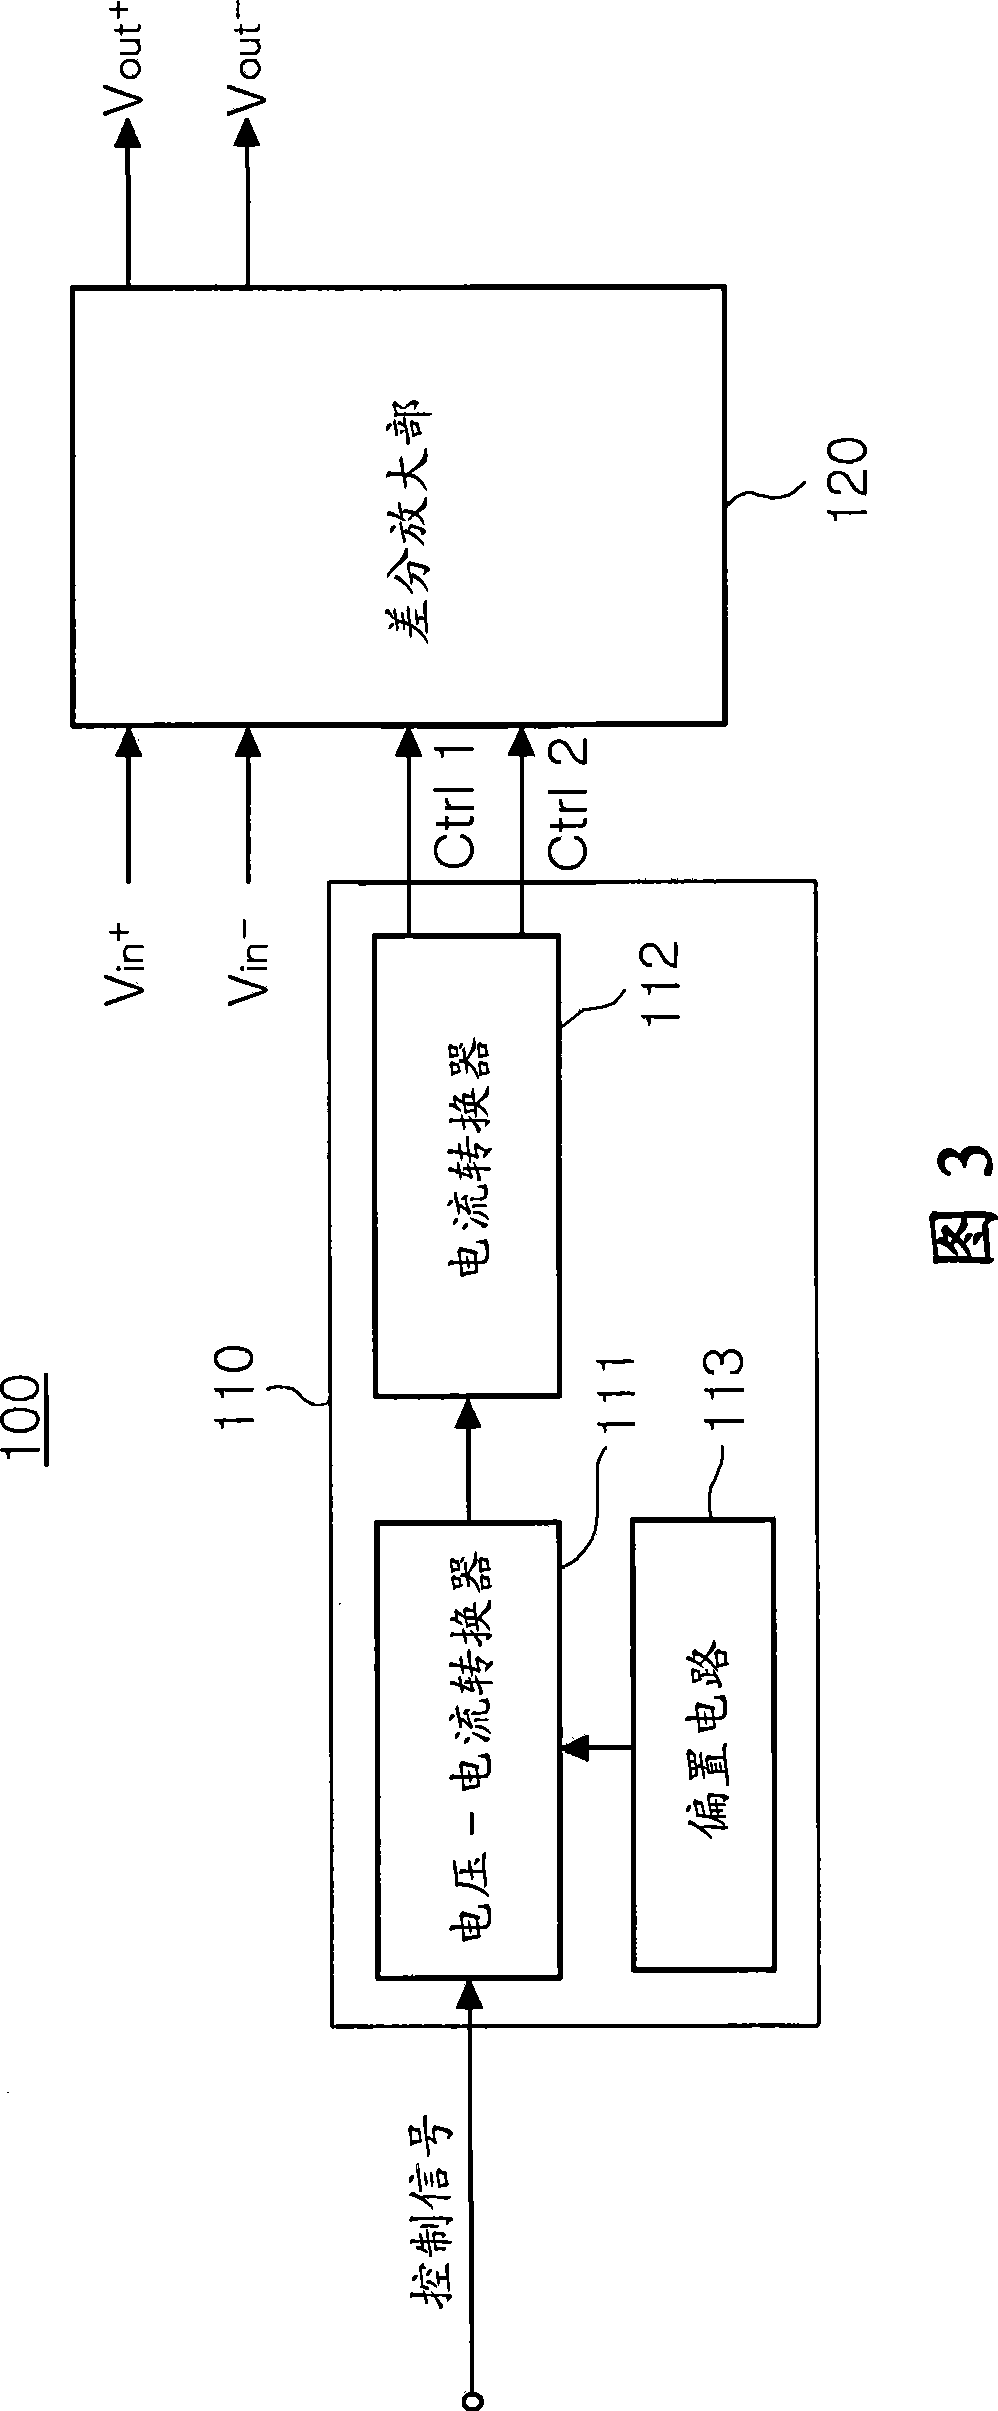 Variable gain amplifier having wide gain variation and wide bandwidth